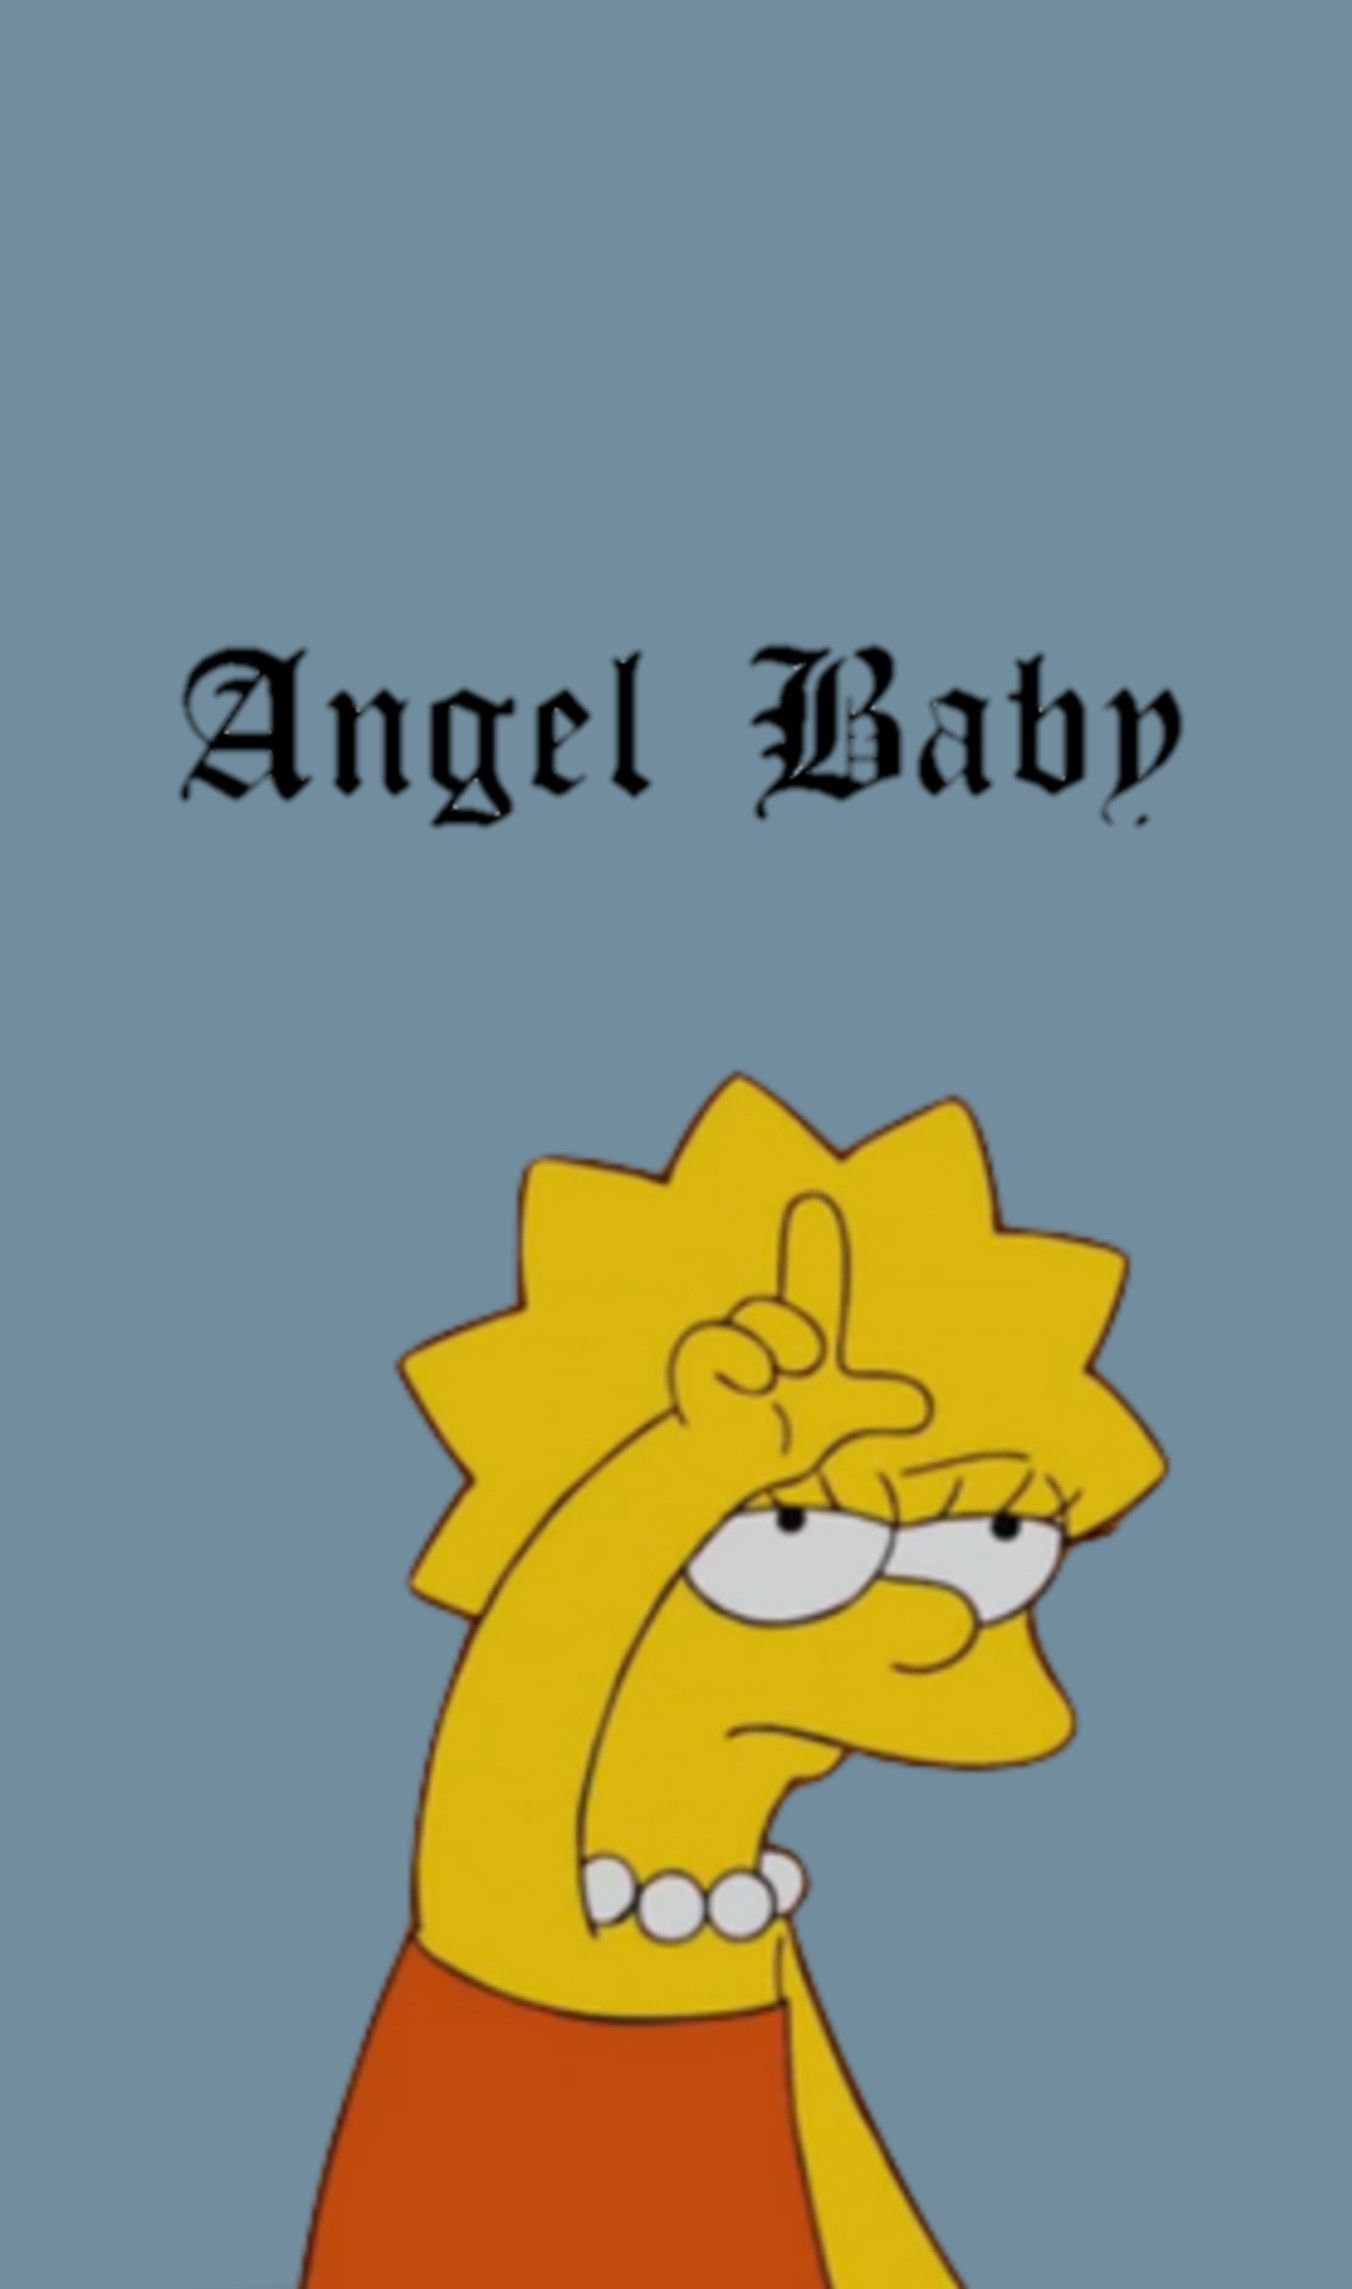 Aesthetic Simpsons Pictures Wallpapers